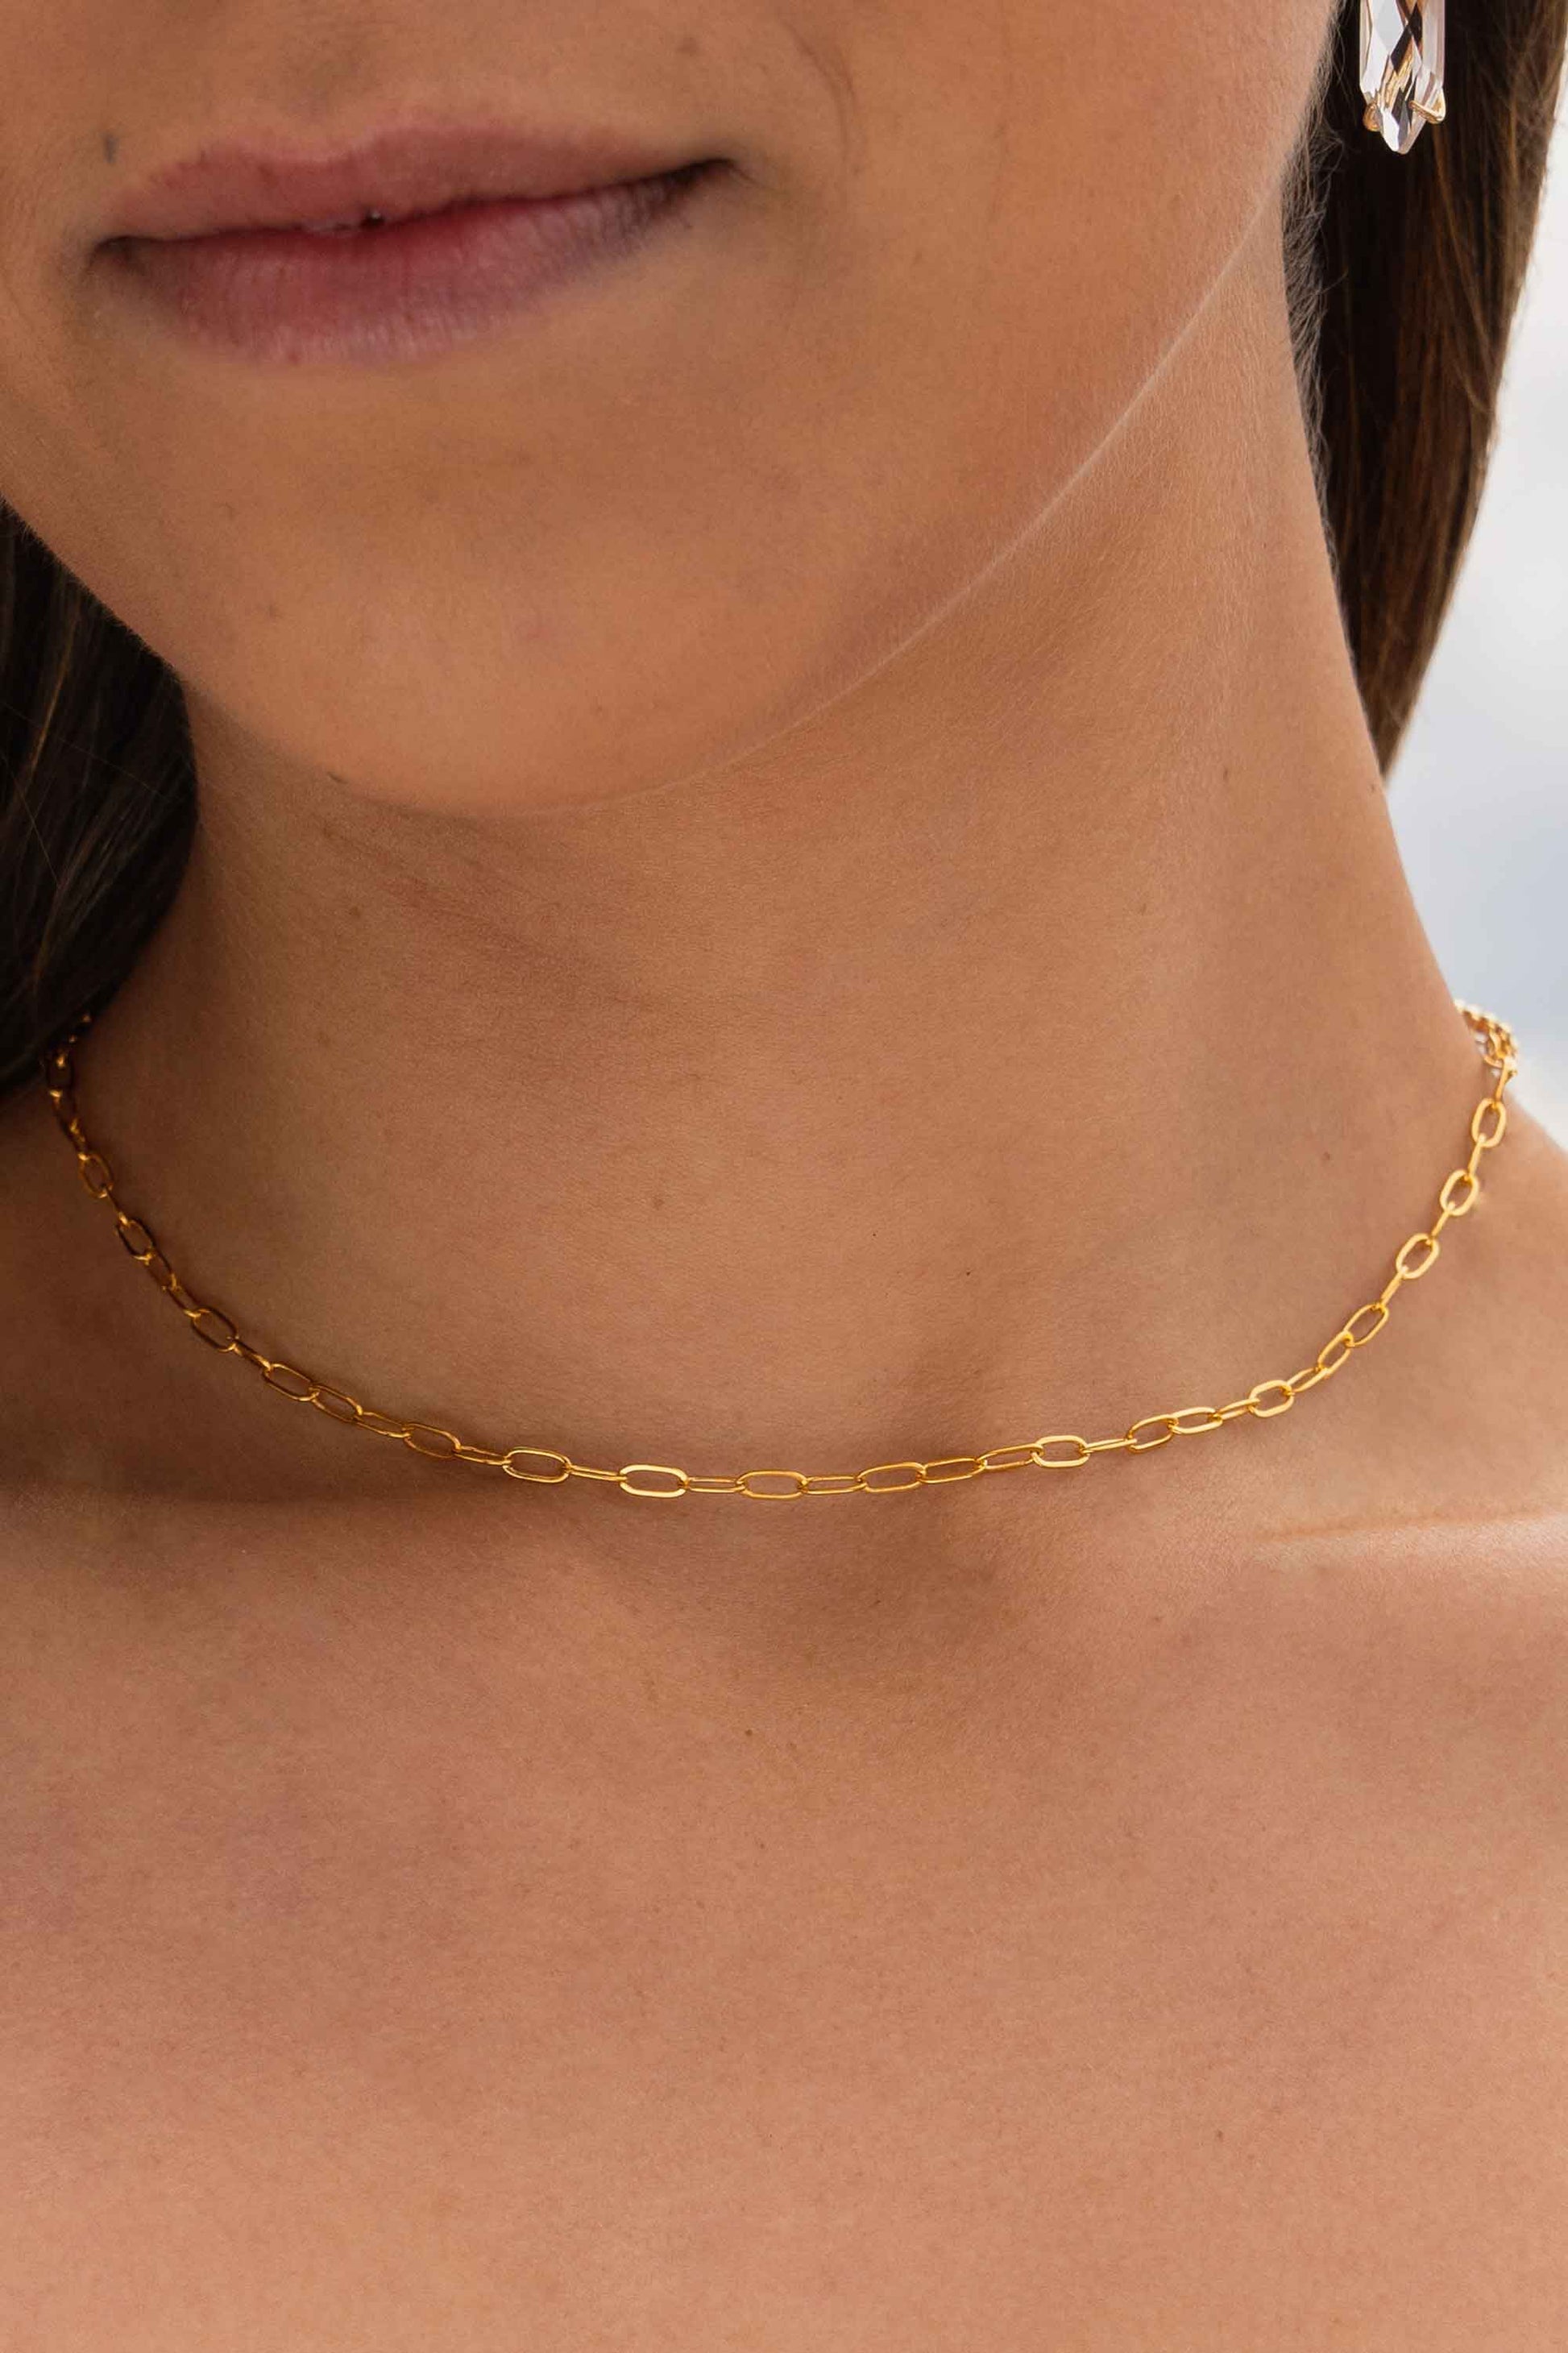 mini-oval-paperclip-delicate-gold-necklace-on-body